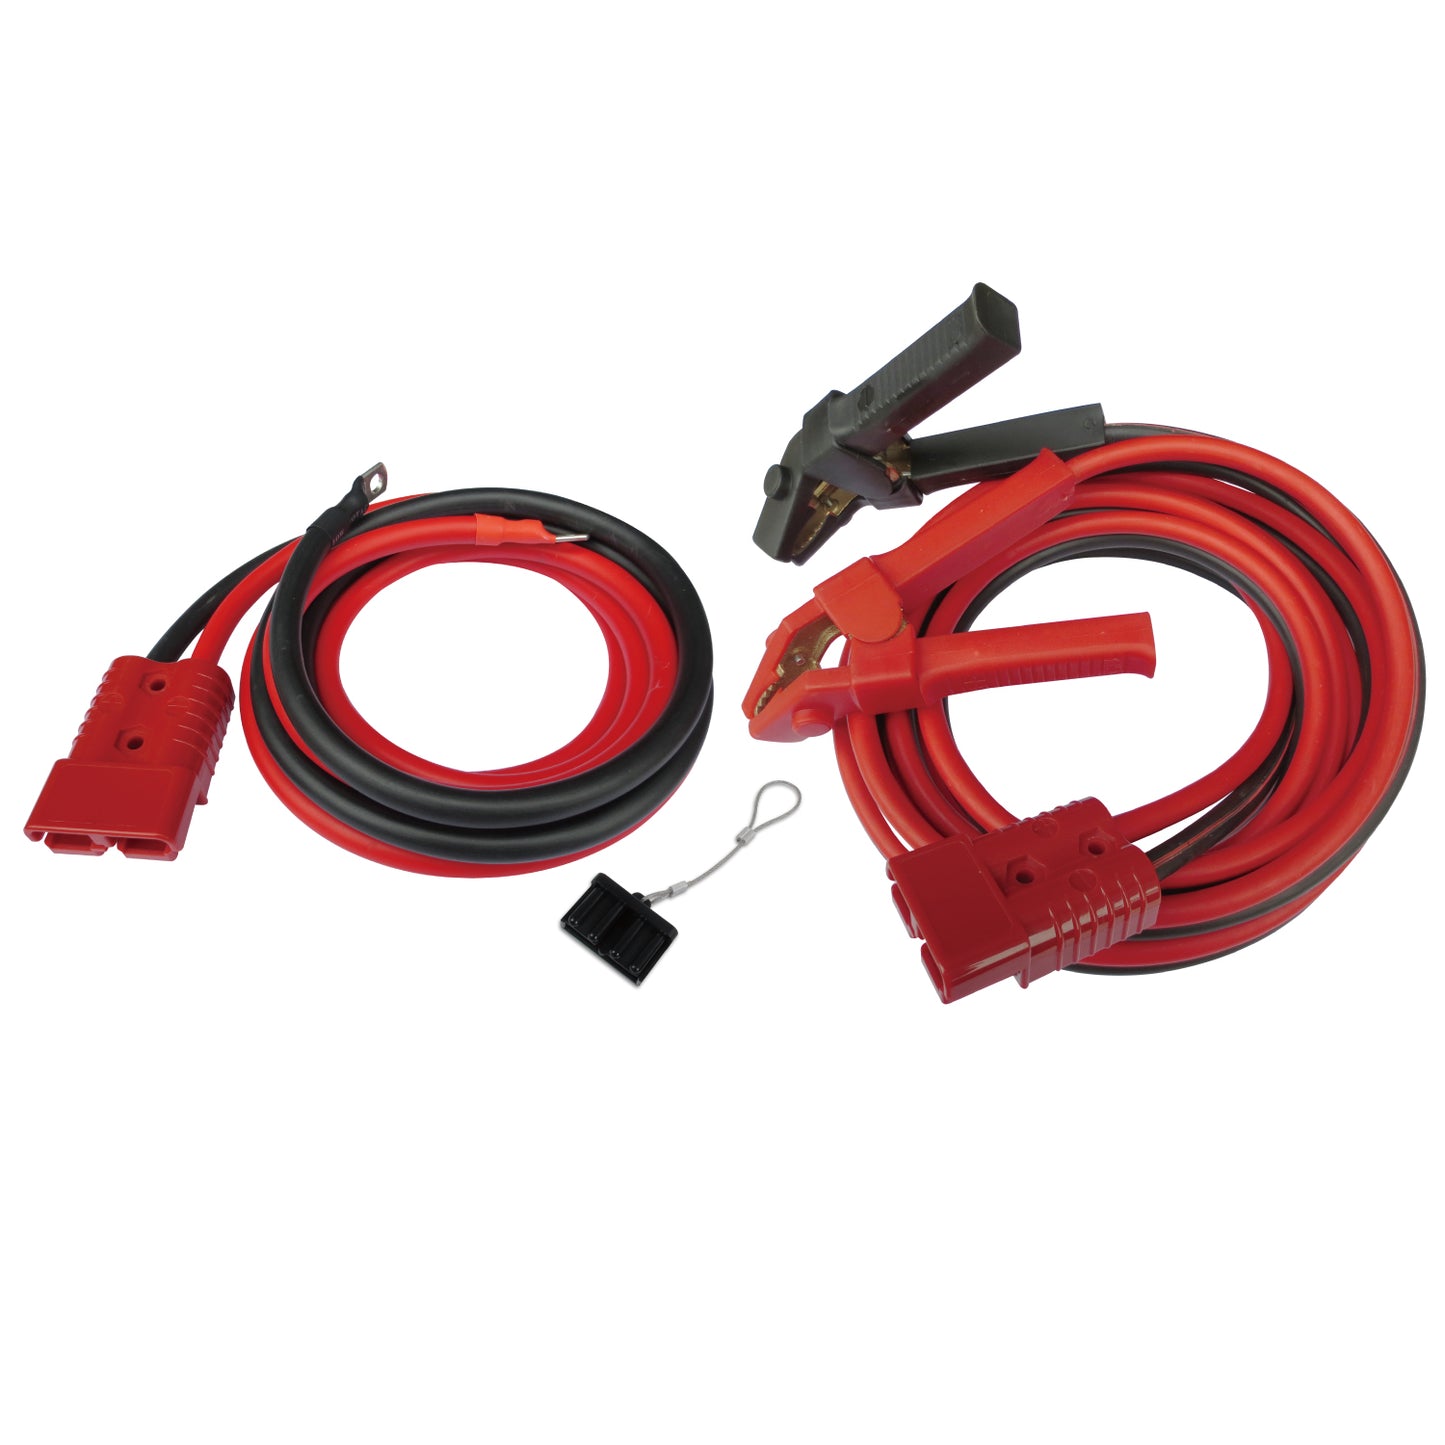 Bulldog Winch Booster Cable 20 Ft 2 Gauge w/Quick Connects And 7.5 Ft Truck Lead Set